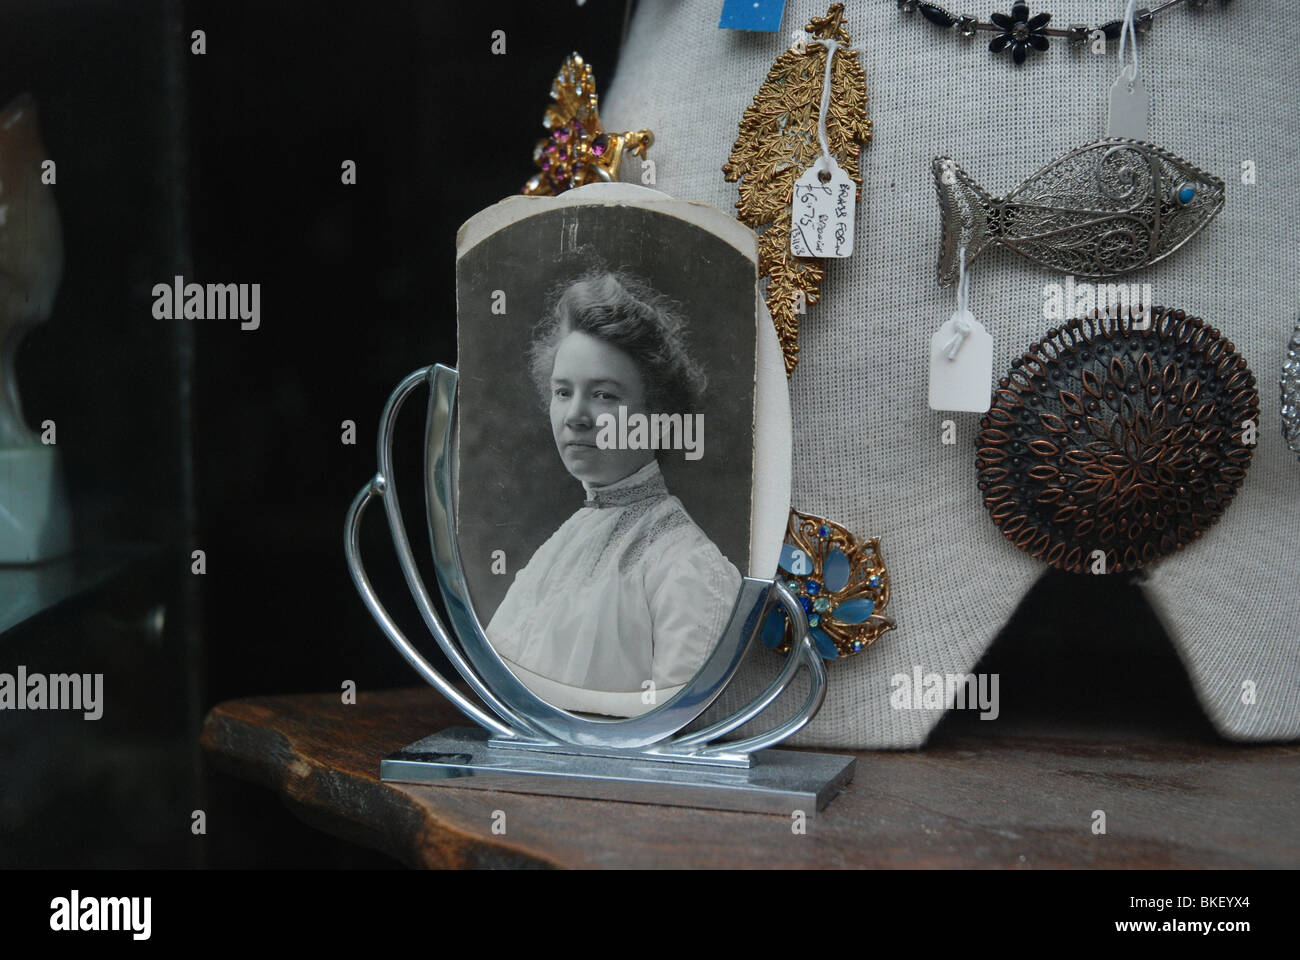 Black and white photograph of a Victorian woman on display in an antique/junk shop window. Stock Photo